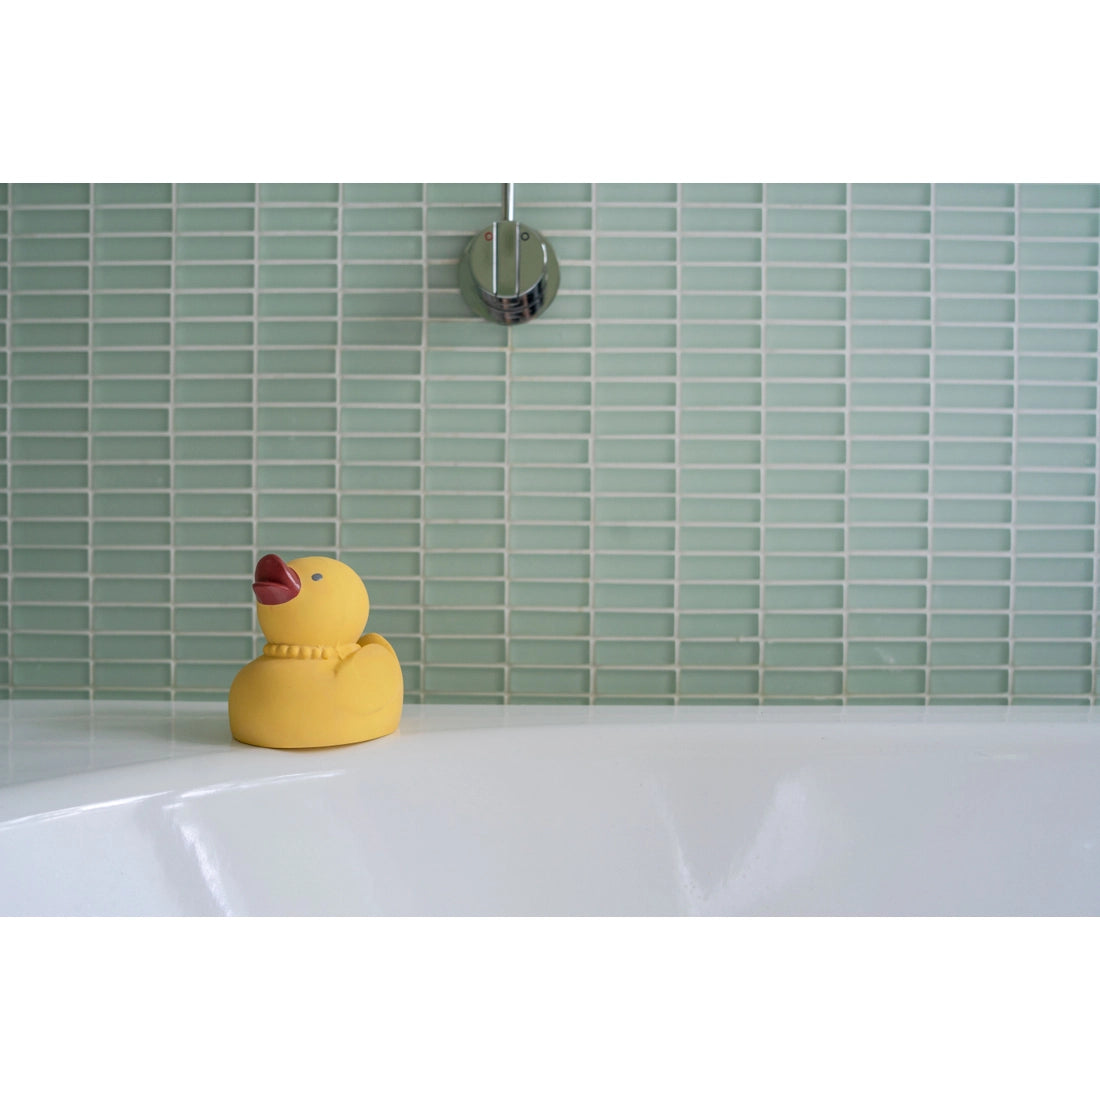 Tara the Duck - Natural Organic Rubber Teether, Rattle & Bath Toy